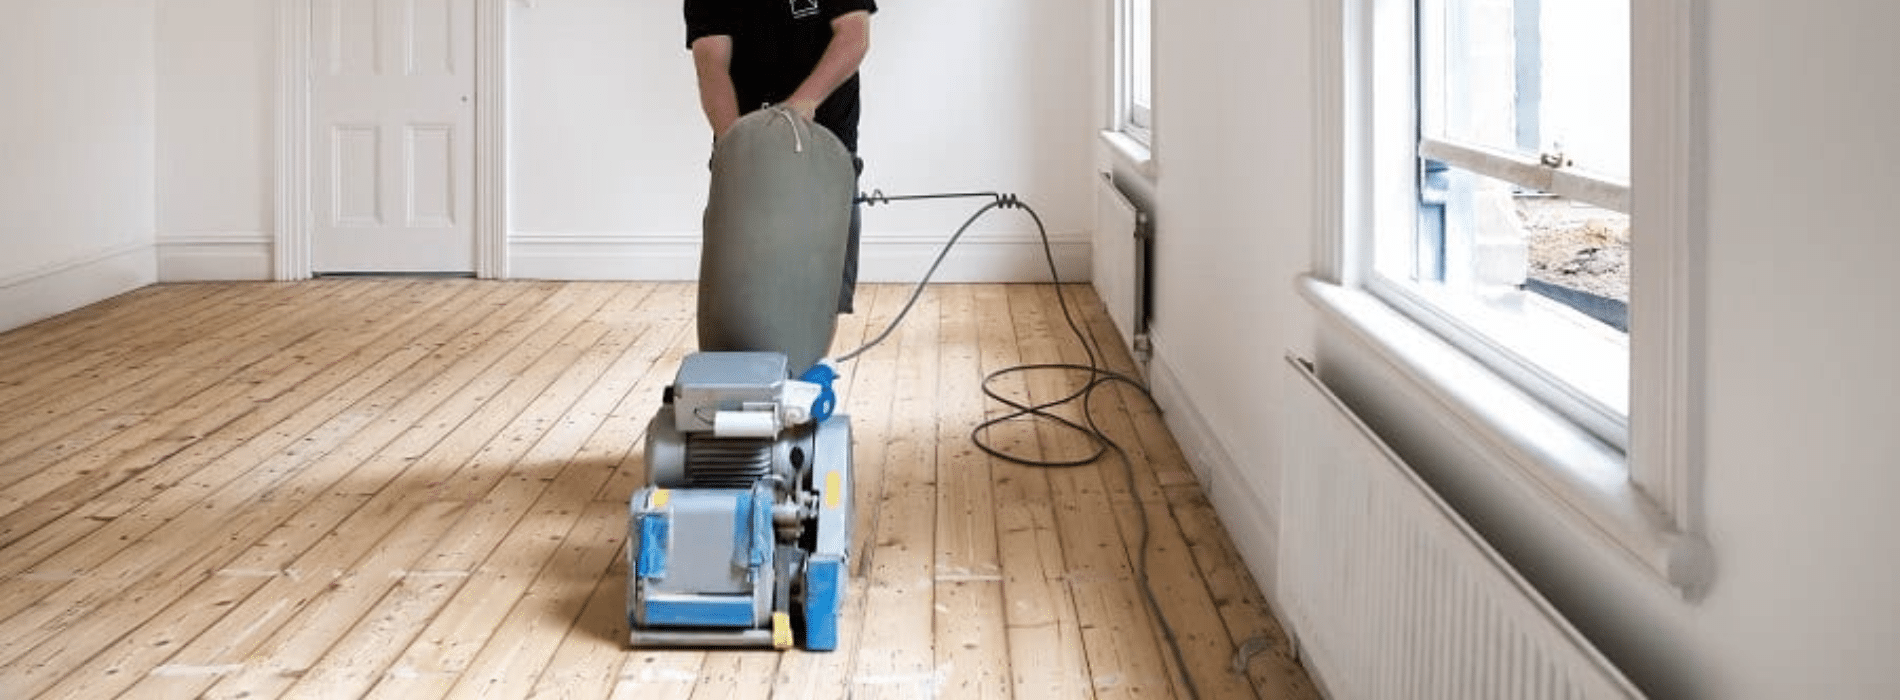 Mr Sander® are using a Bona Scorpion drum sander with a dimension of 200 mm, 1.5 kW power, and 240 V voltage in Seven Sisters, N15. The sander operates at a frequency of 50 Hz and is connected to a dust extraction system with a HEPA filter for a clean and efficient outcome.